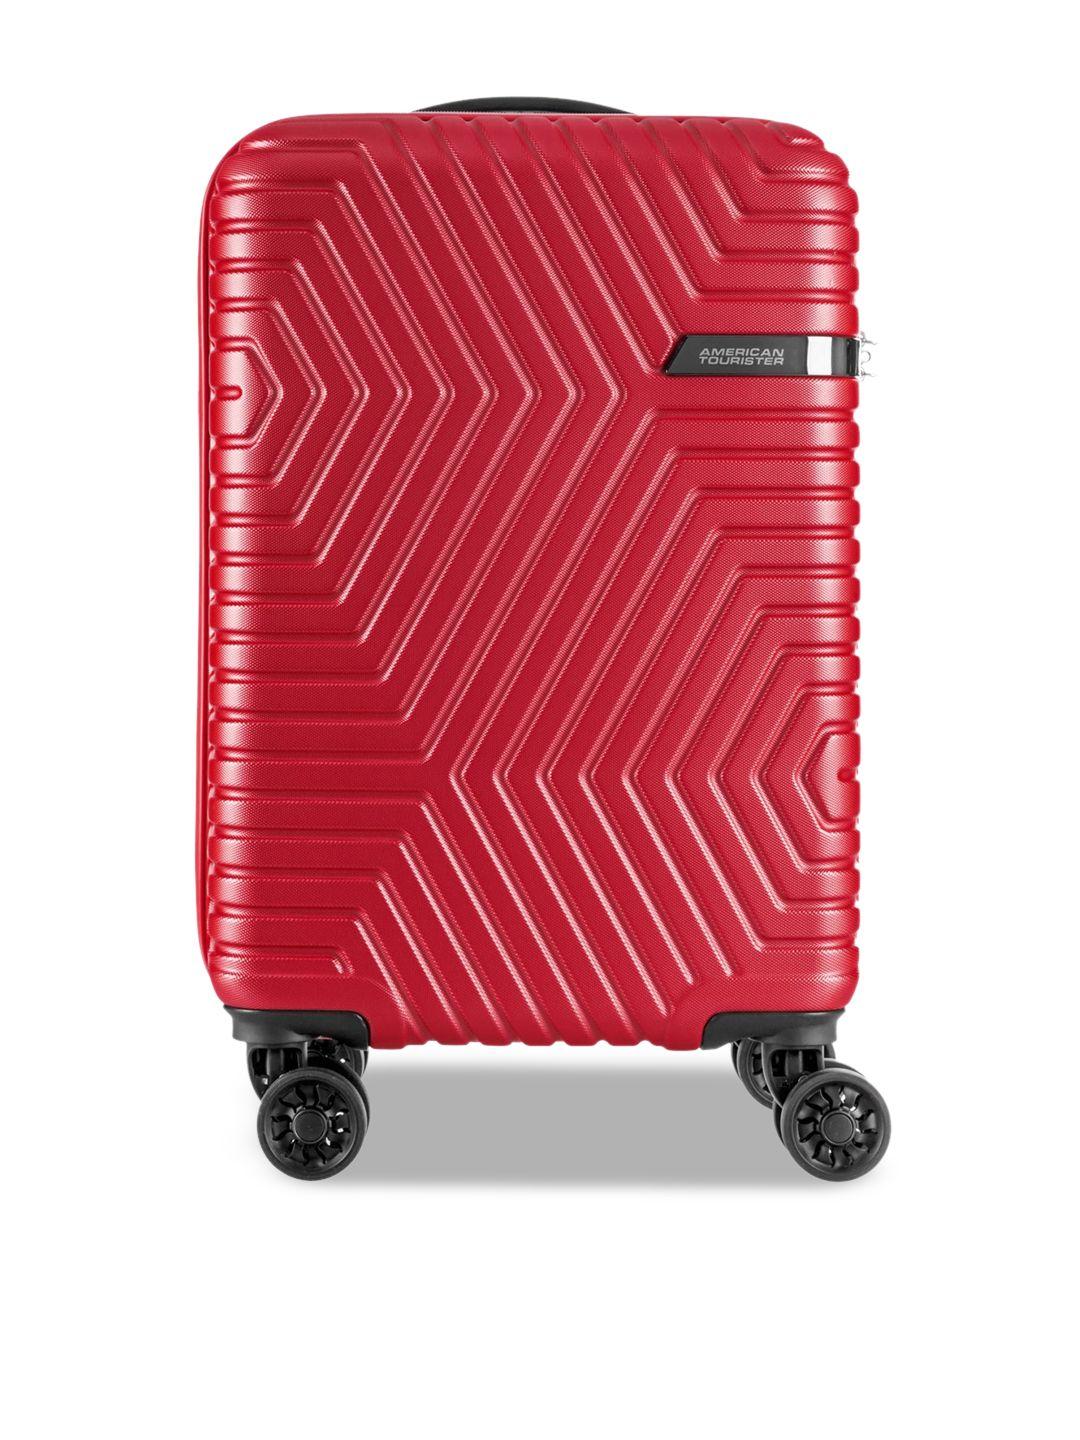 american tourister unisex red textured soft-sided trolley suitcase